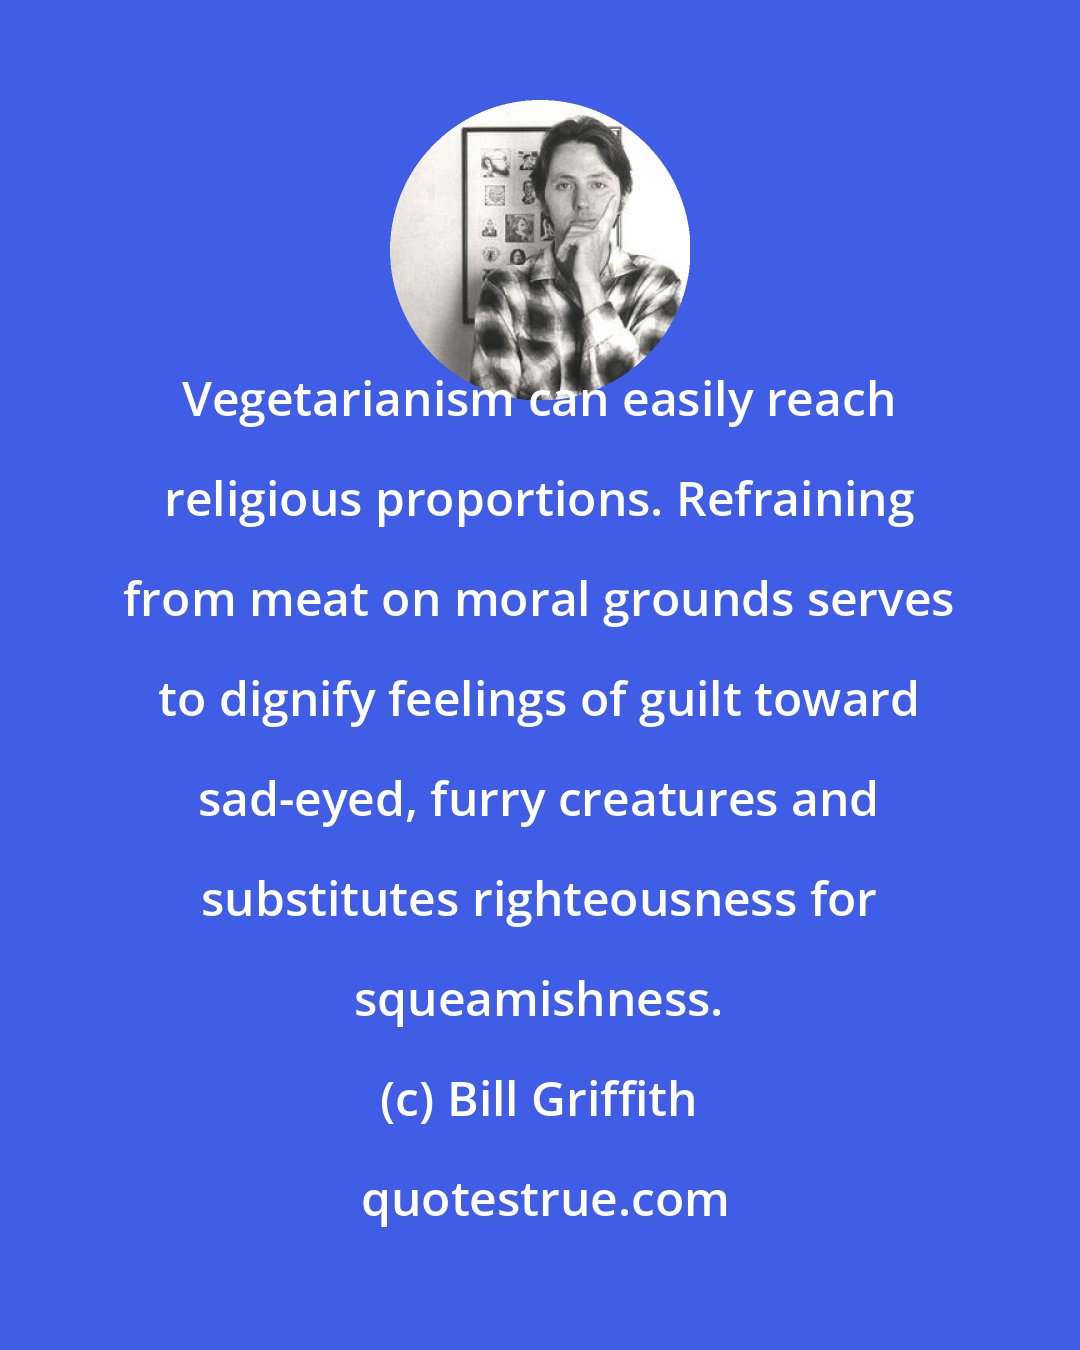 Bill Griffith: Vegetarianism can easily reach religious proportions. Refraining from meat on moral grounds serves to dignify feelings of guilt toward sad-eyed, furry creatures and substitutes righteousness for squeamishness.